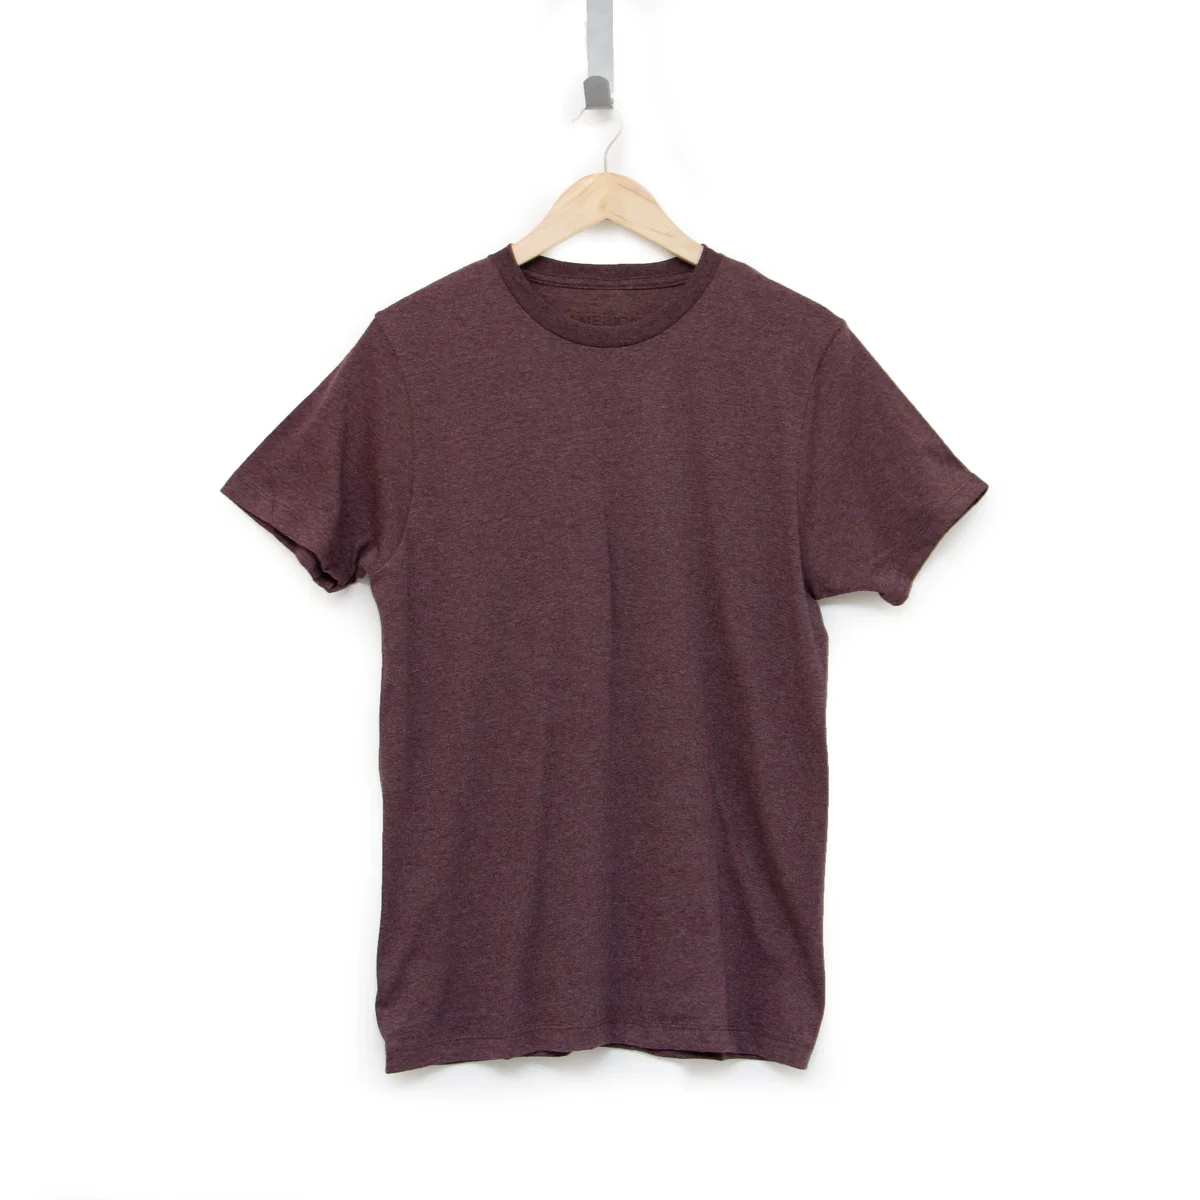 All American Clothing Co. Men's 60/40 T-SHIRT posted by ProdOrigin USA in Men's Apparel